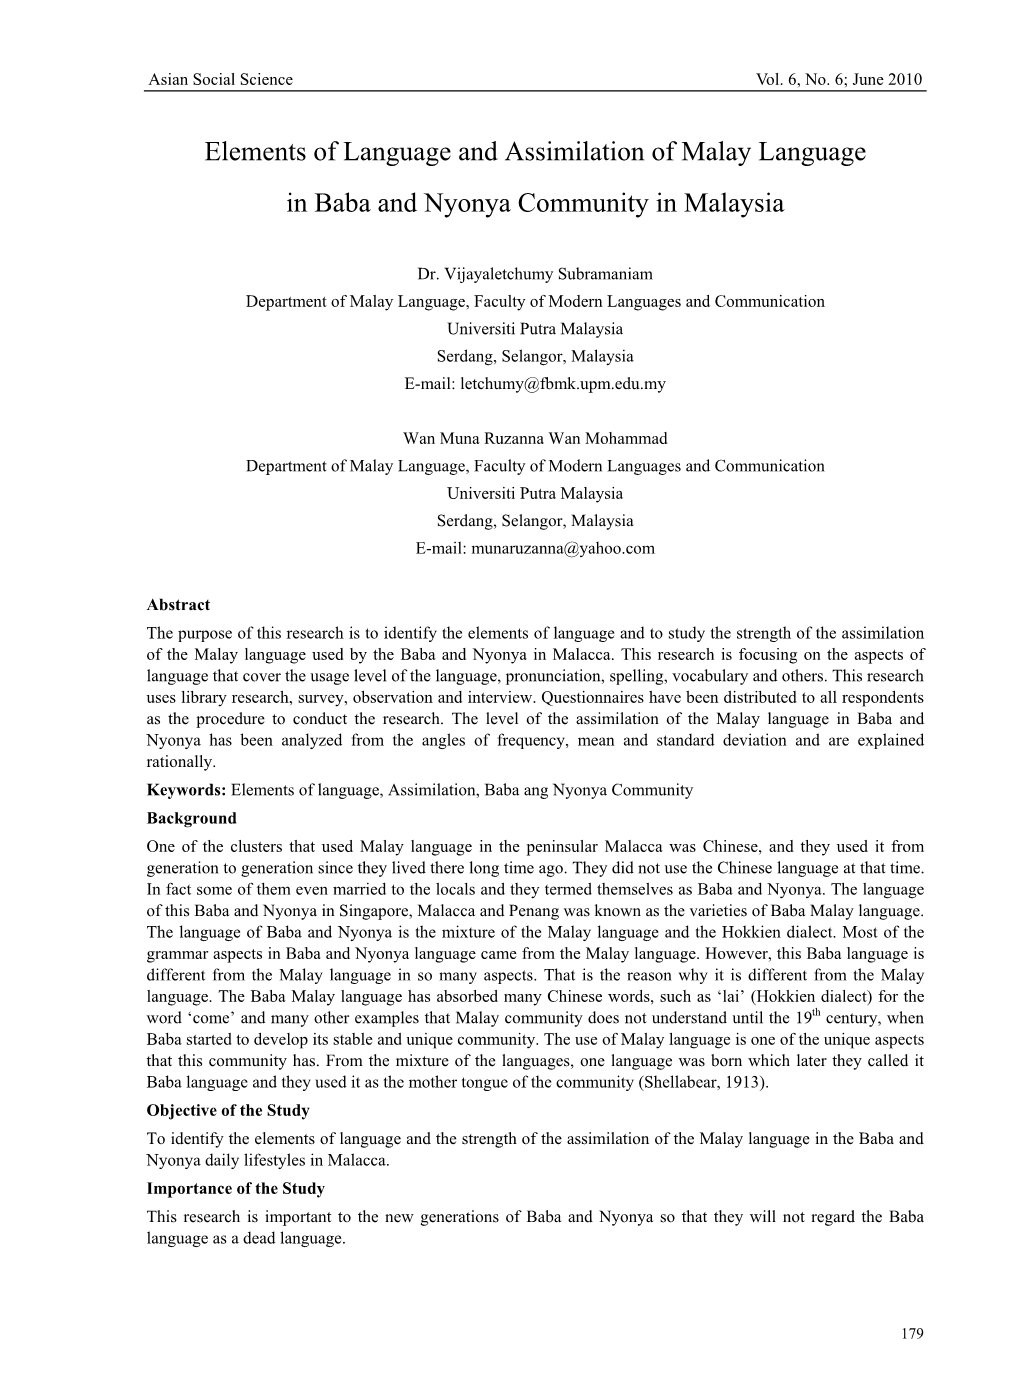 Elements of Language and Assimilation of Malay Language in Baba and Nyonya Community in Malaysia